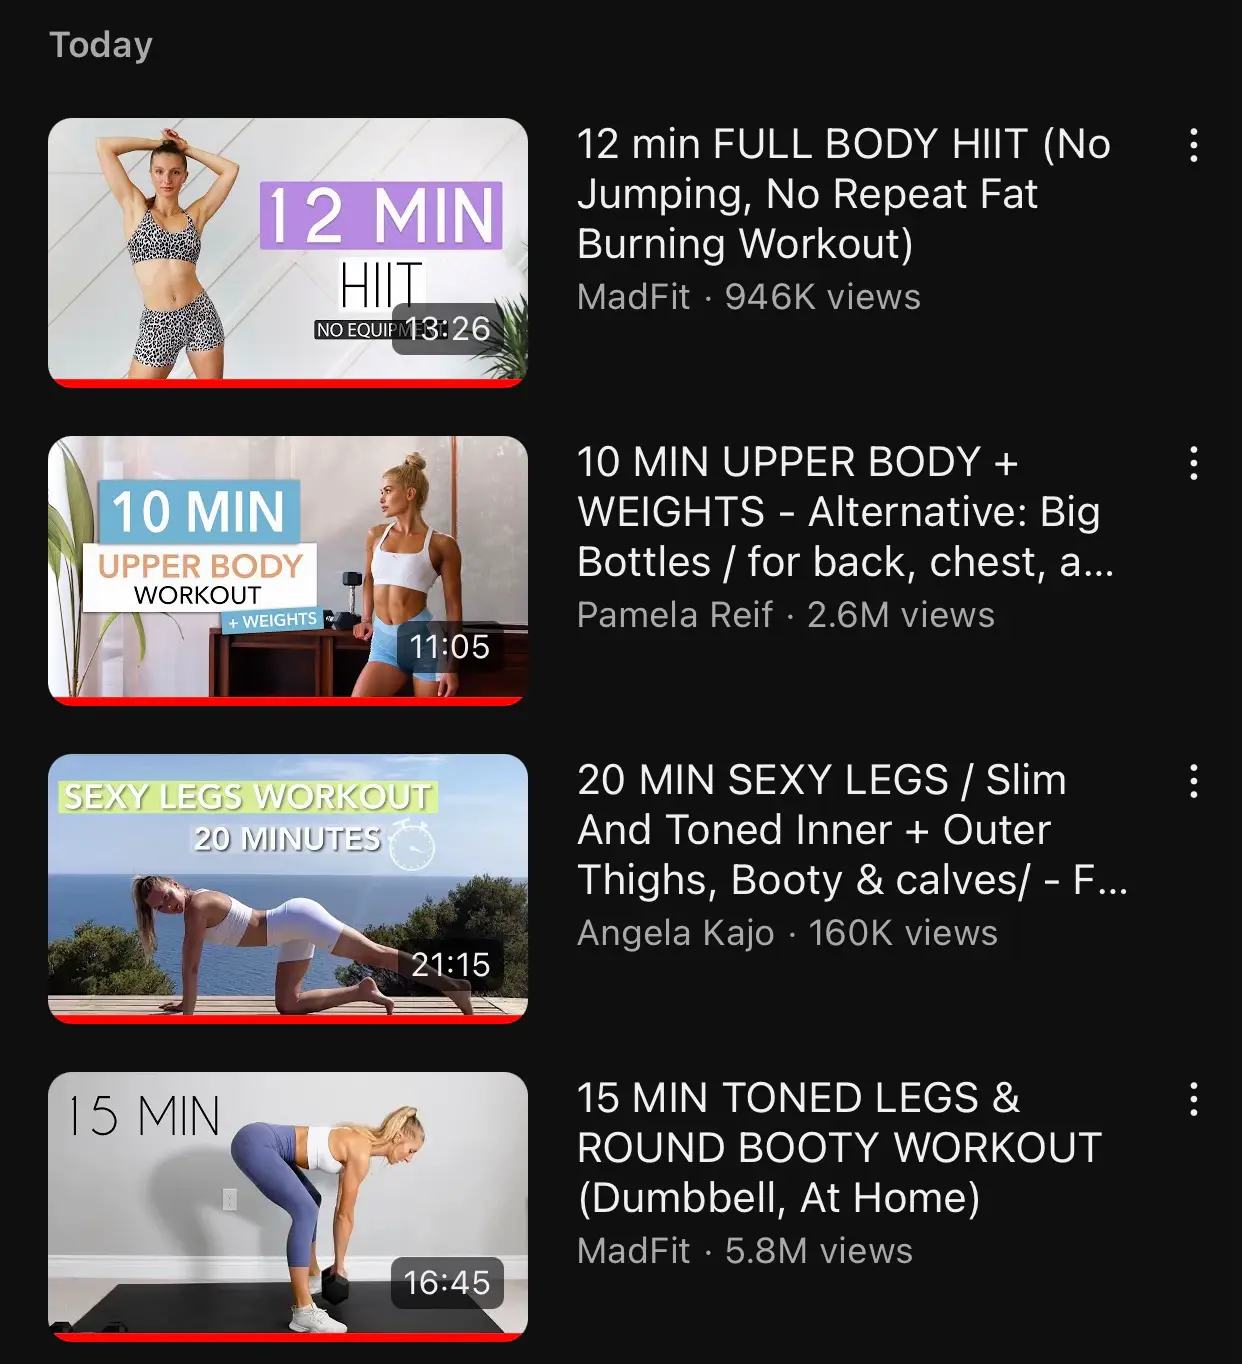 15 MIN TONED LEGS & ROUND BOOTY WORKOUT (Dumbbell, At Home) 